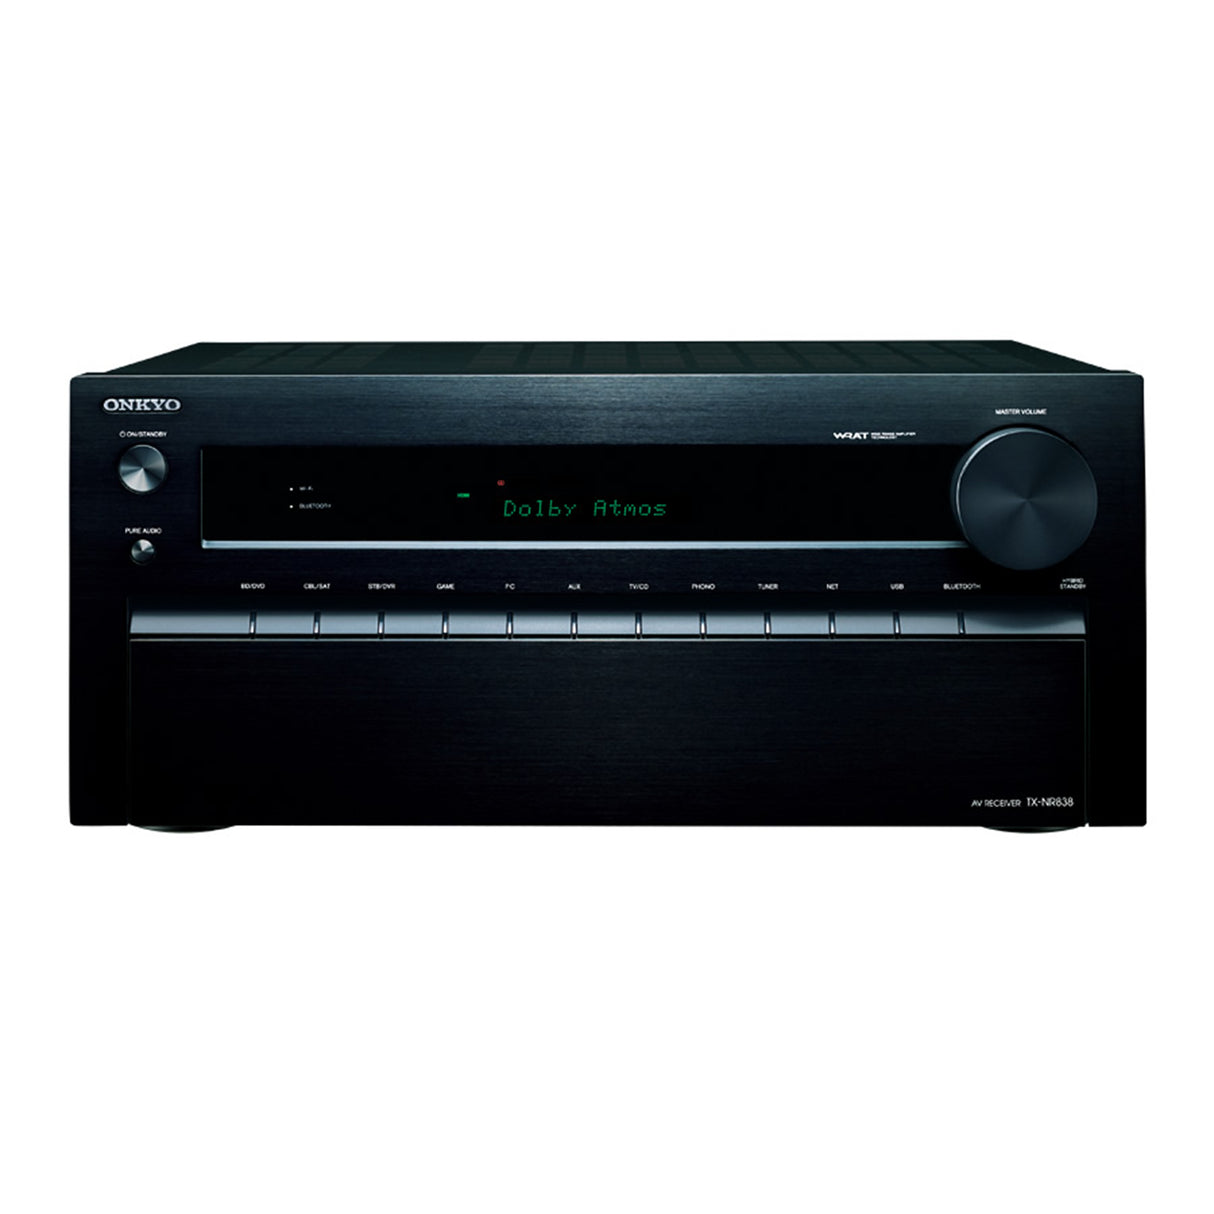 Onkyo TXNR-838 - 7.2 Channel Network AV Receiver with Dolby Atmos (Demo Unit/ Without Box Unit)